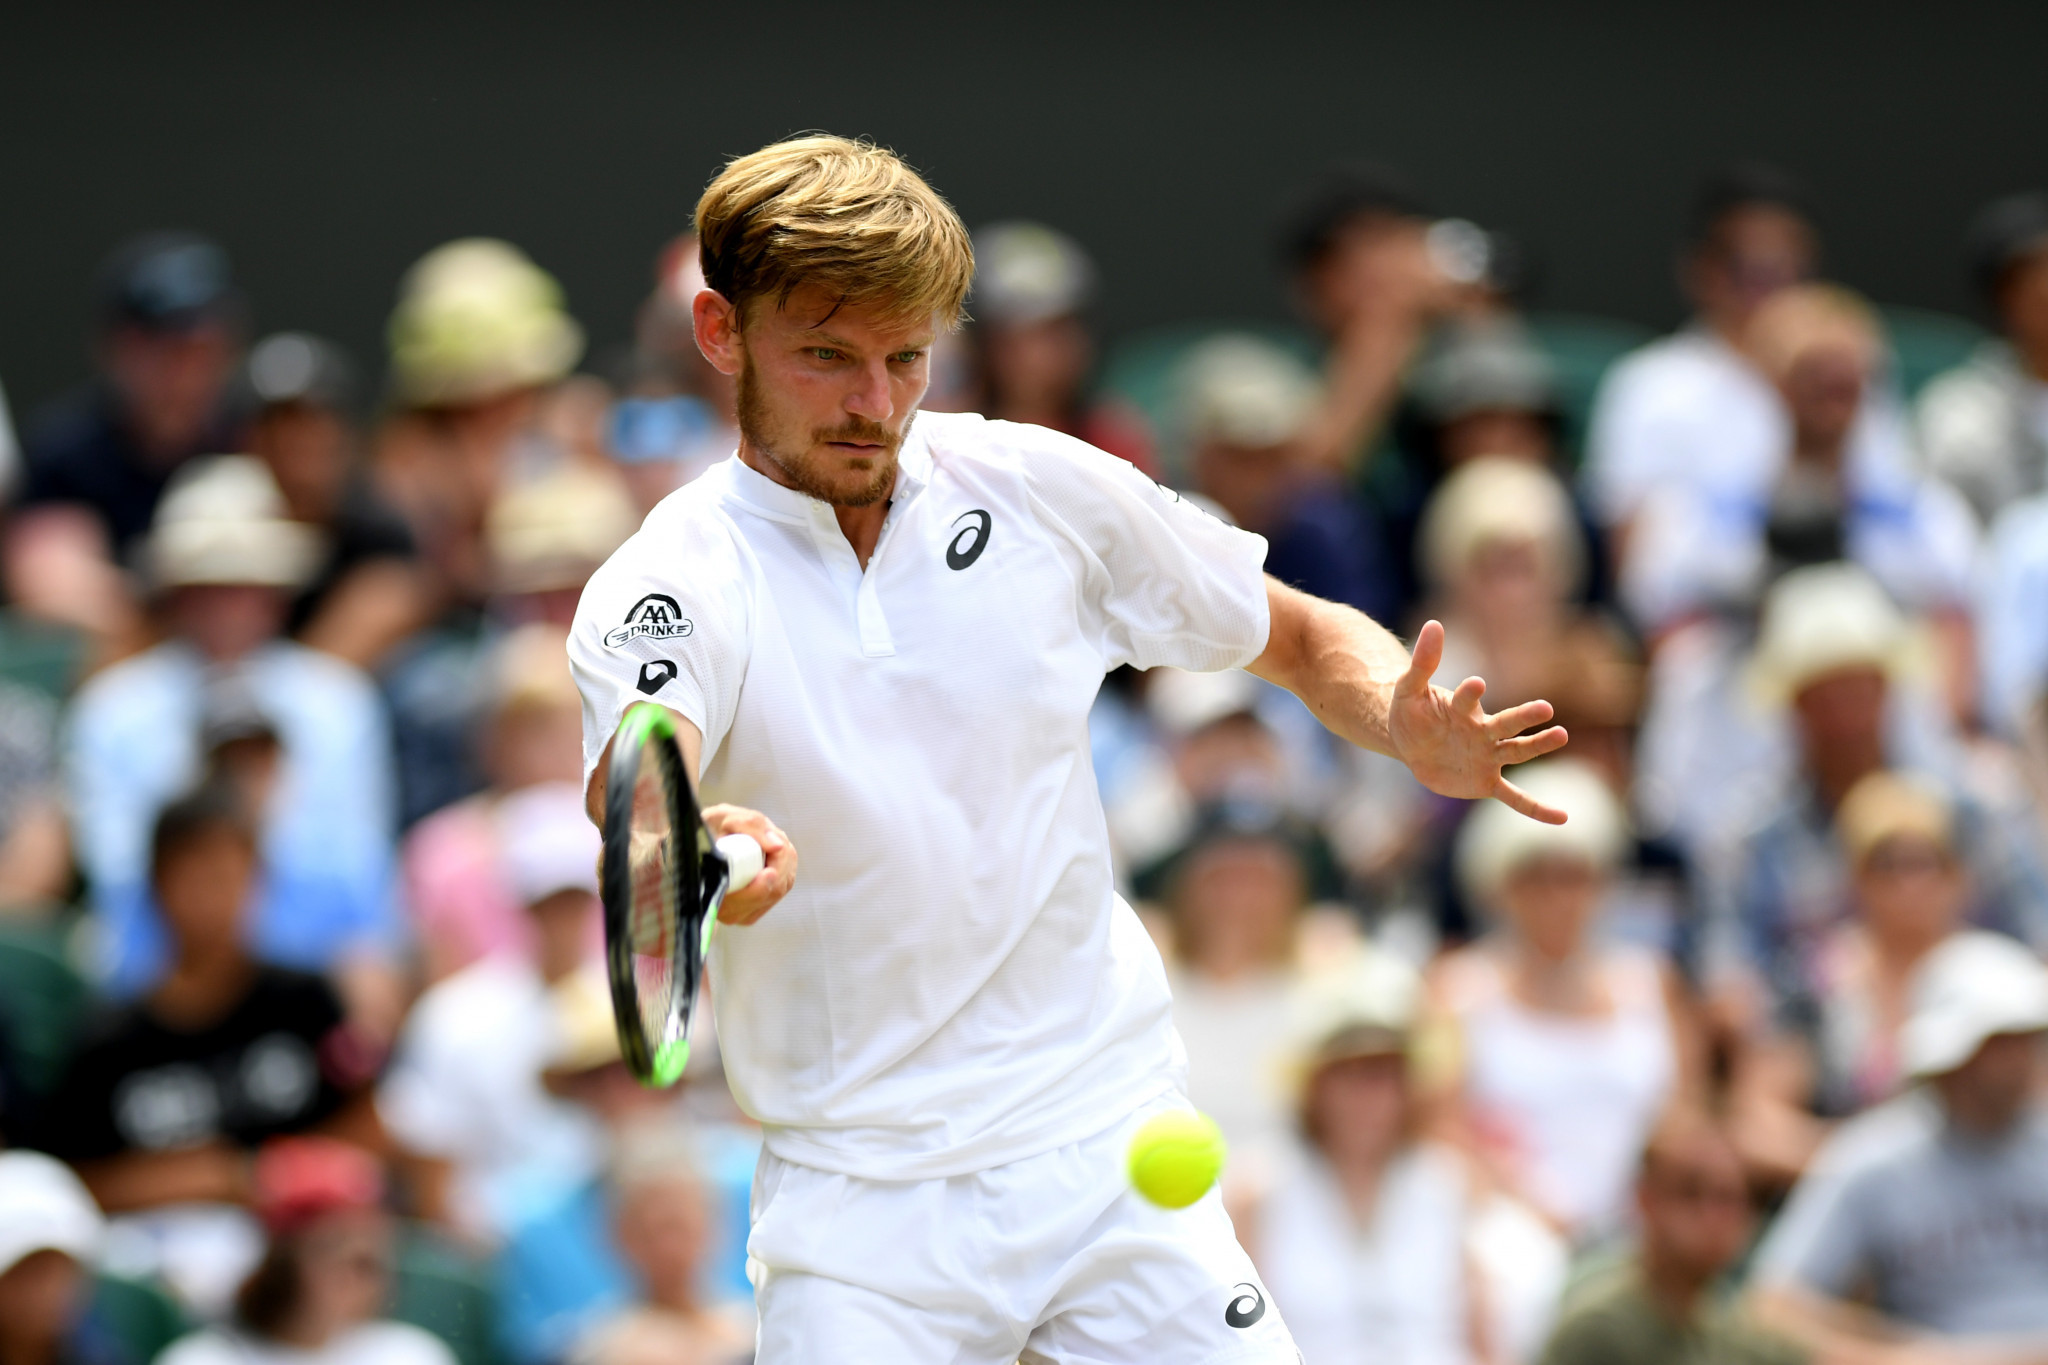 Belgium's Goffin started well, going a break up in the first set ©Getty Images